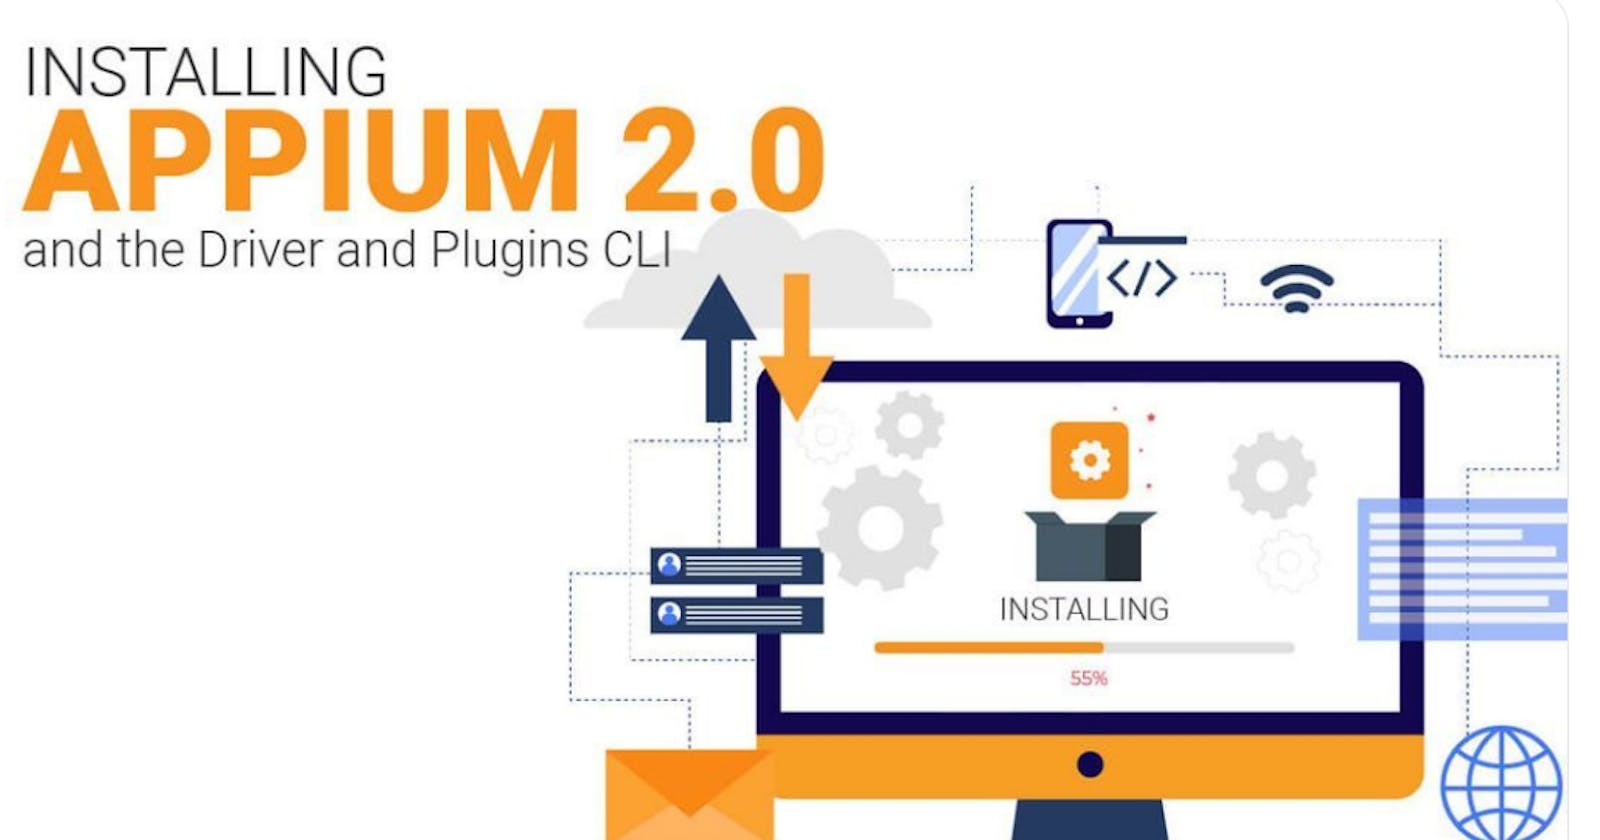 Installing Appium 2.0 and the Driver and Plugins CLI